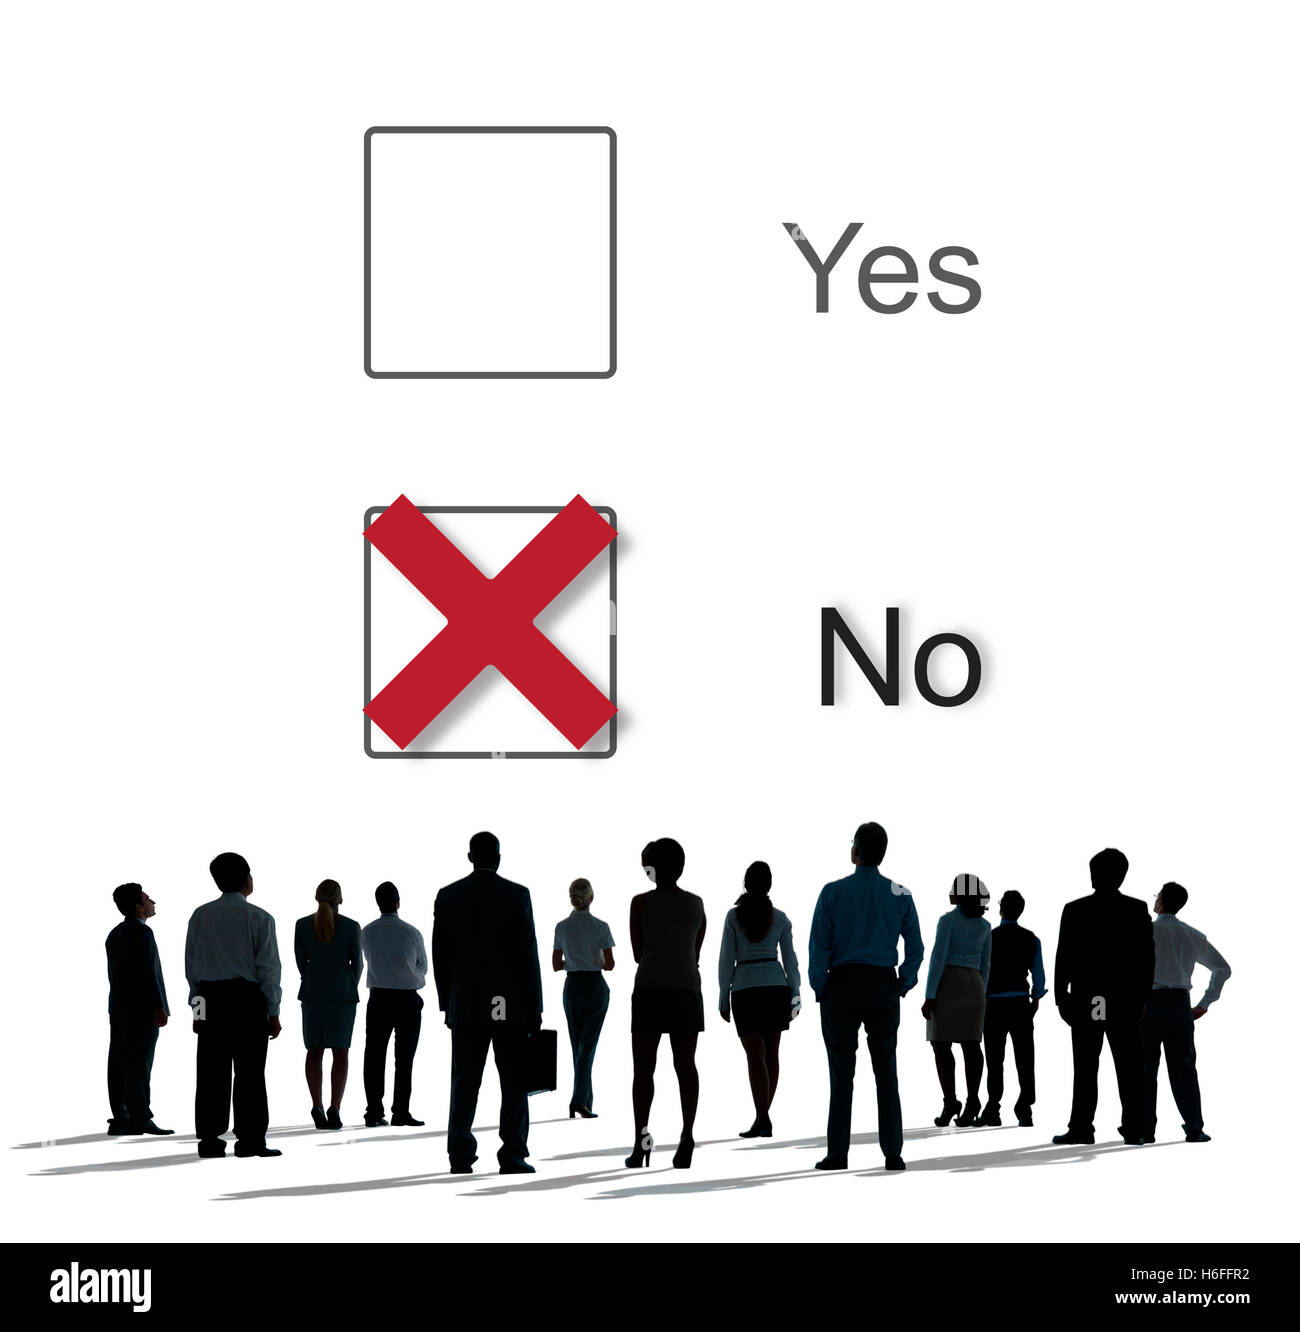 Yes No Answer Questionnaire Concept Stock Photo